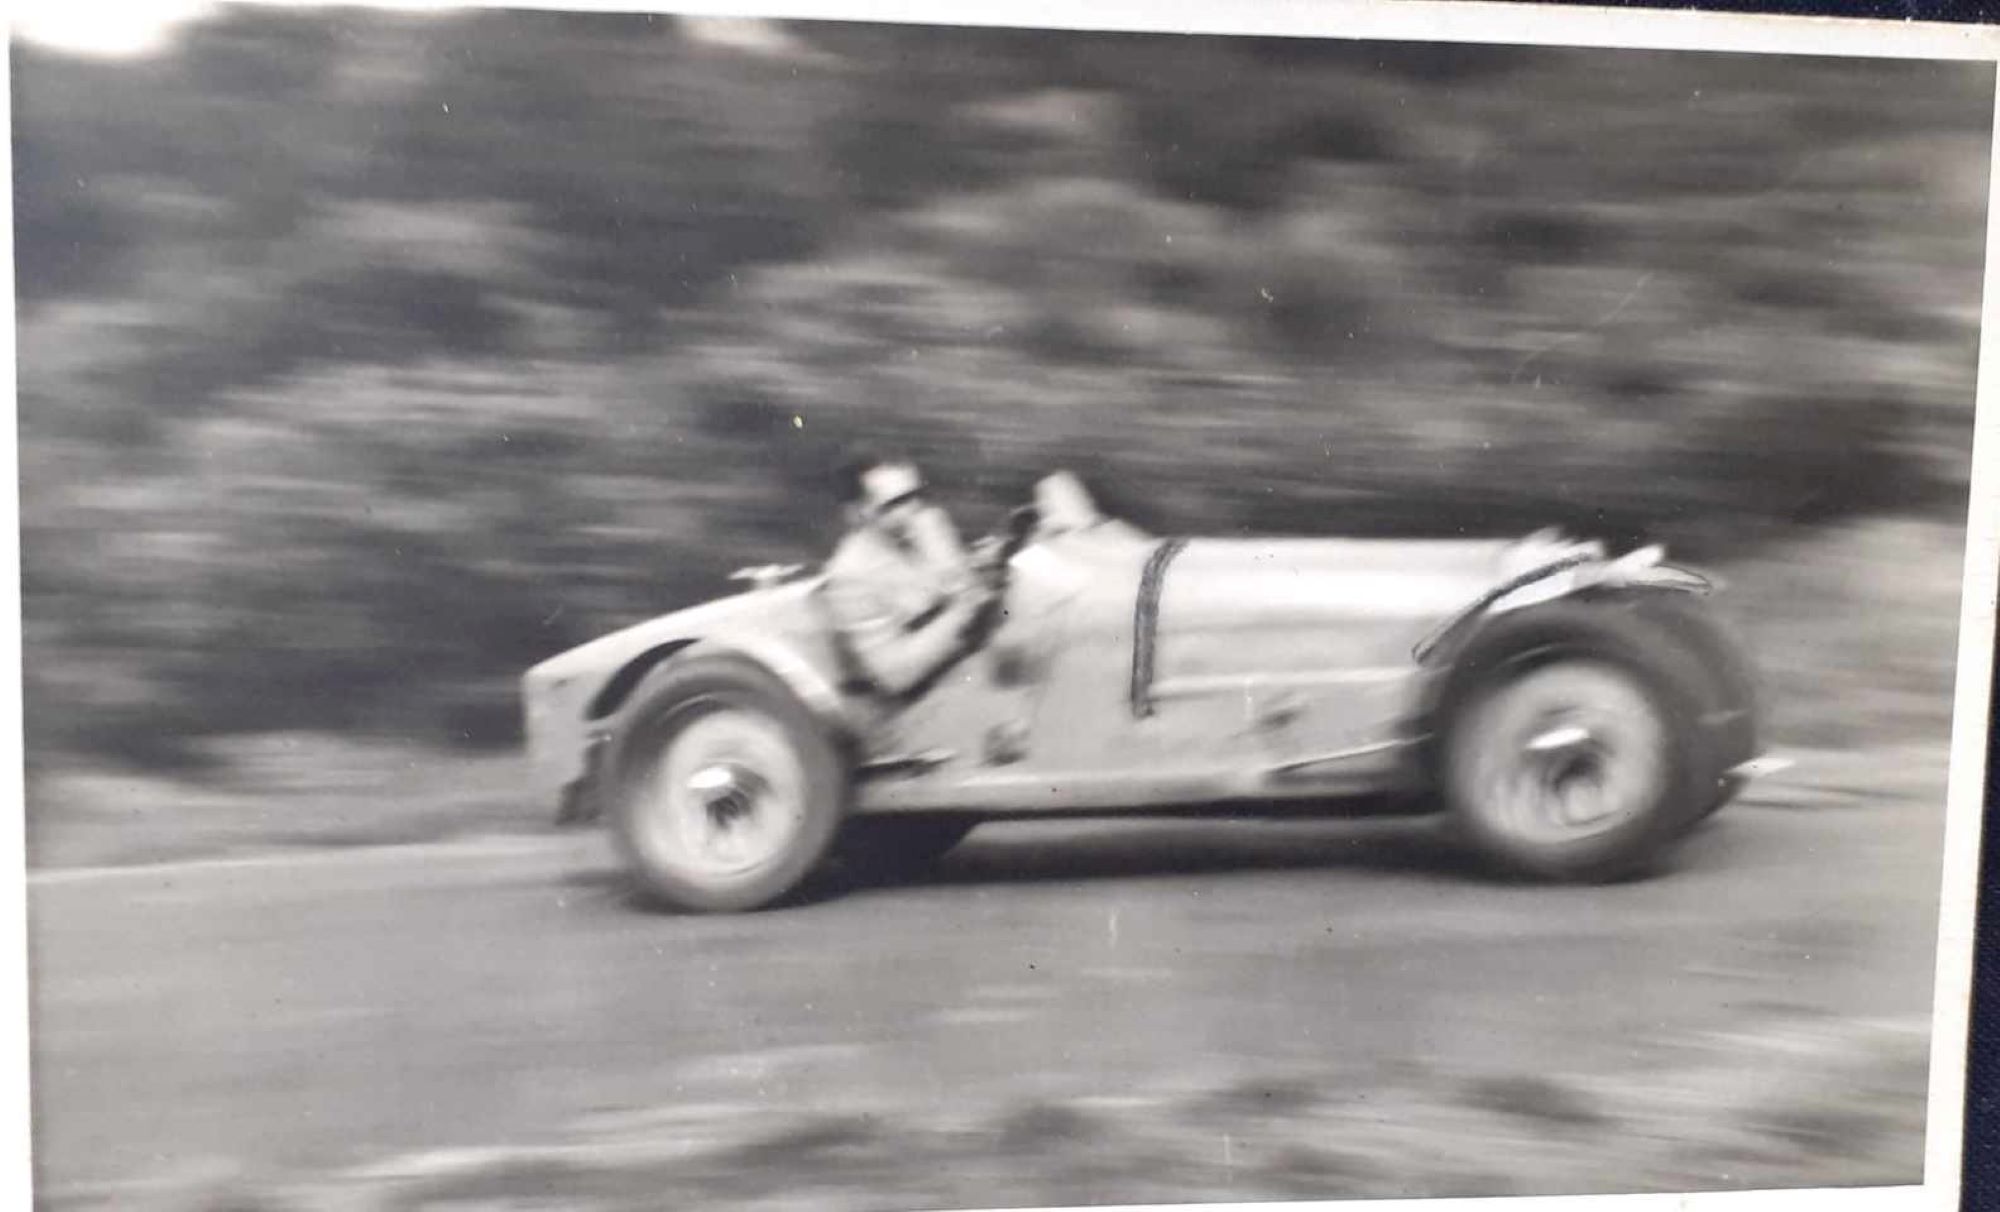 Name:  NSCC 1950 #0116 Bugatti T35 at speed - light colour 1950's - image Graeme Wells arch Anthony Wel.jpg
Views: 158
Size:  158.1 KB